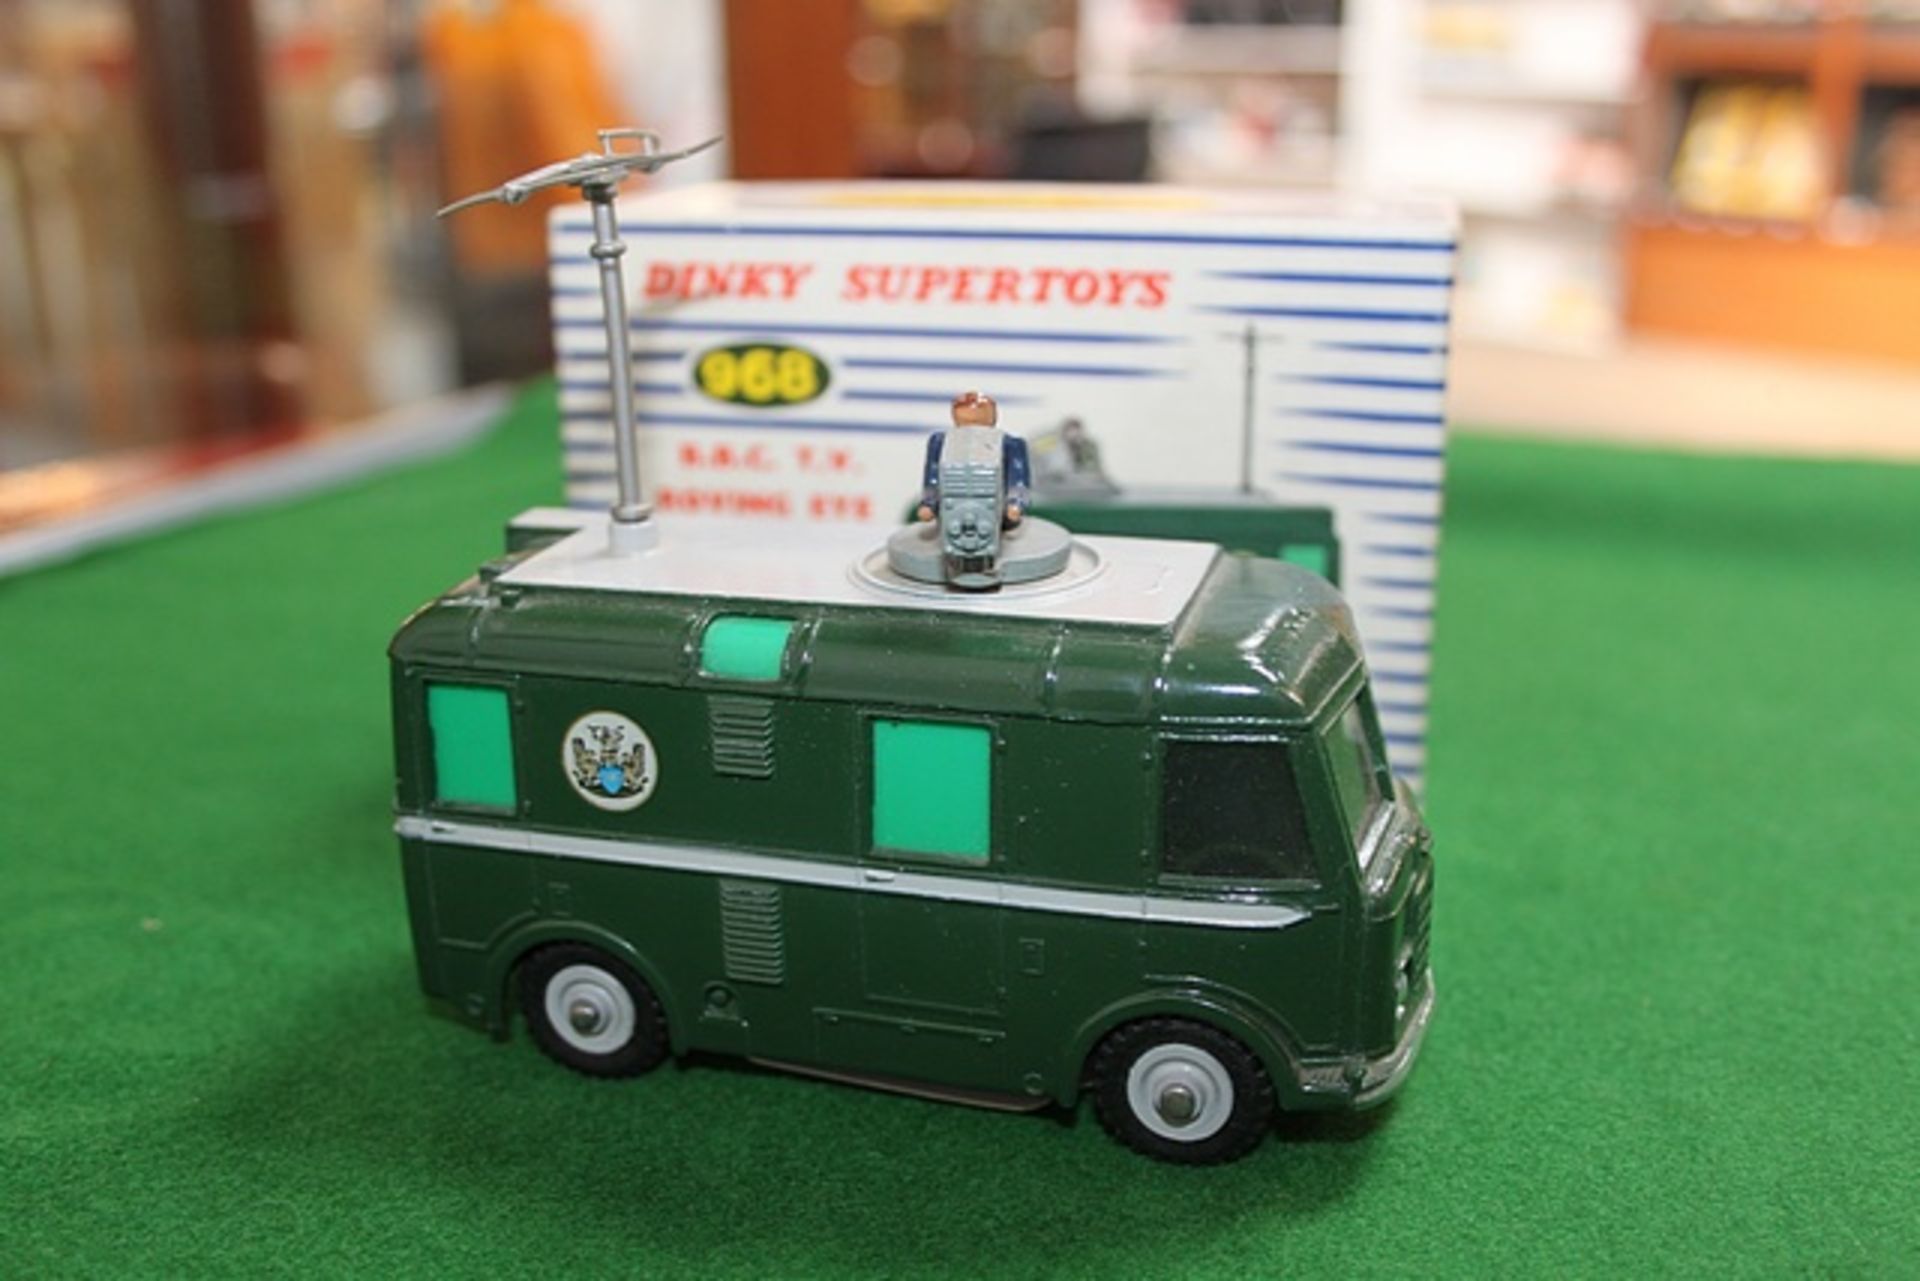 Dinky Toys #968 BBC TV Roving Eye Vehicle Complete With Box - Image 2 of 4